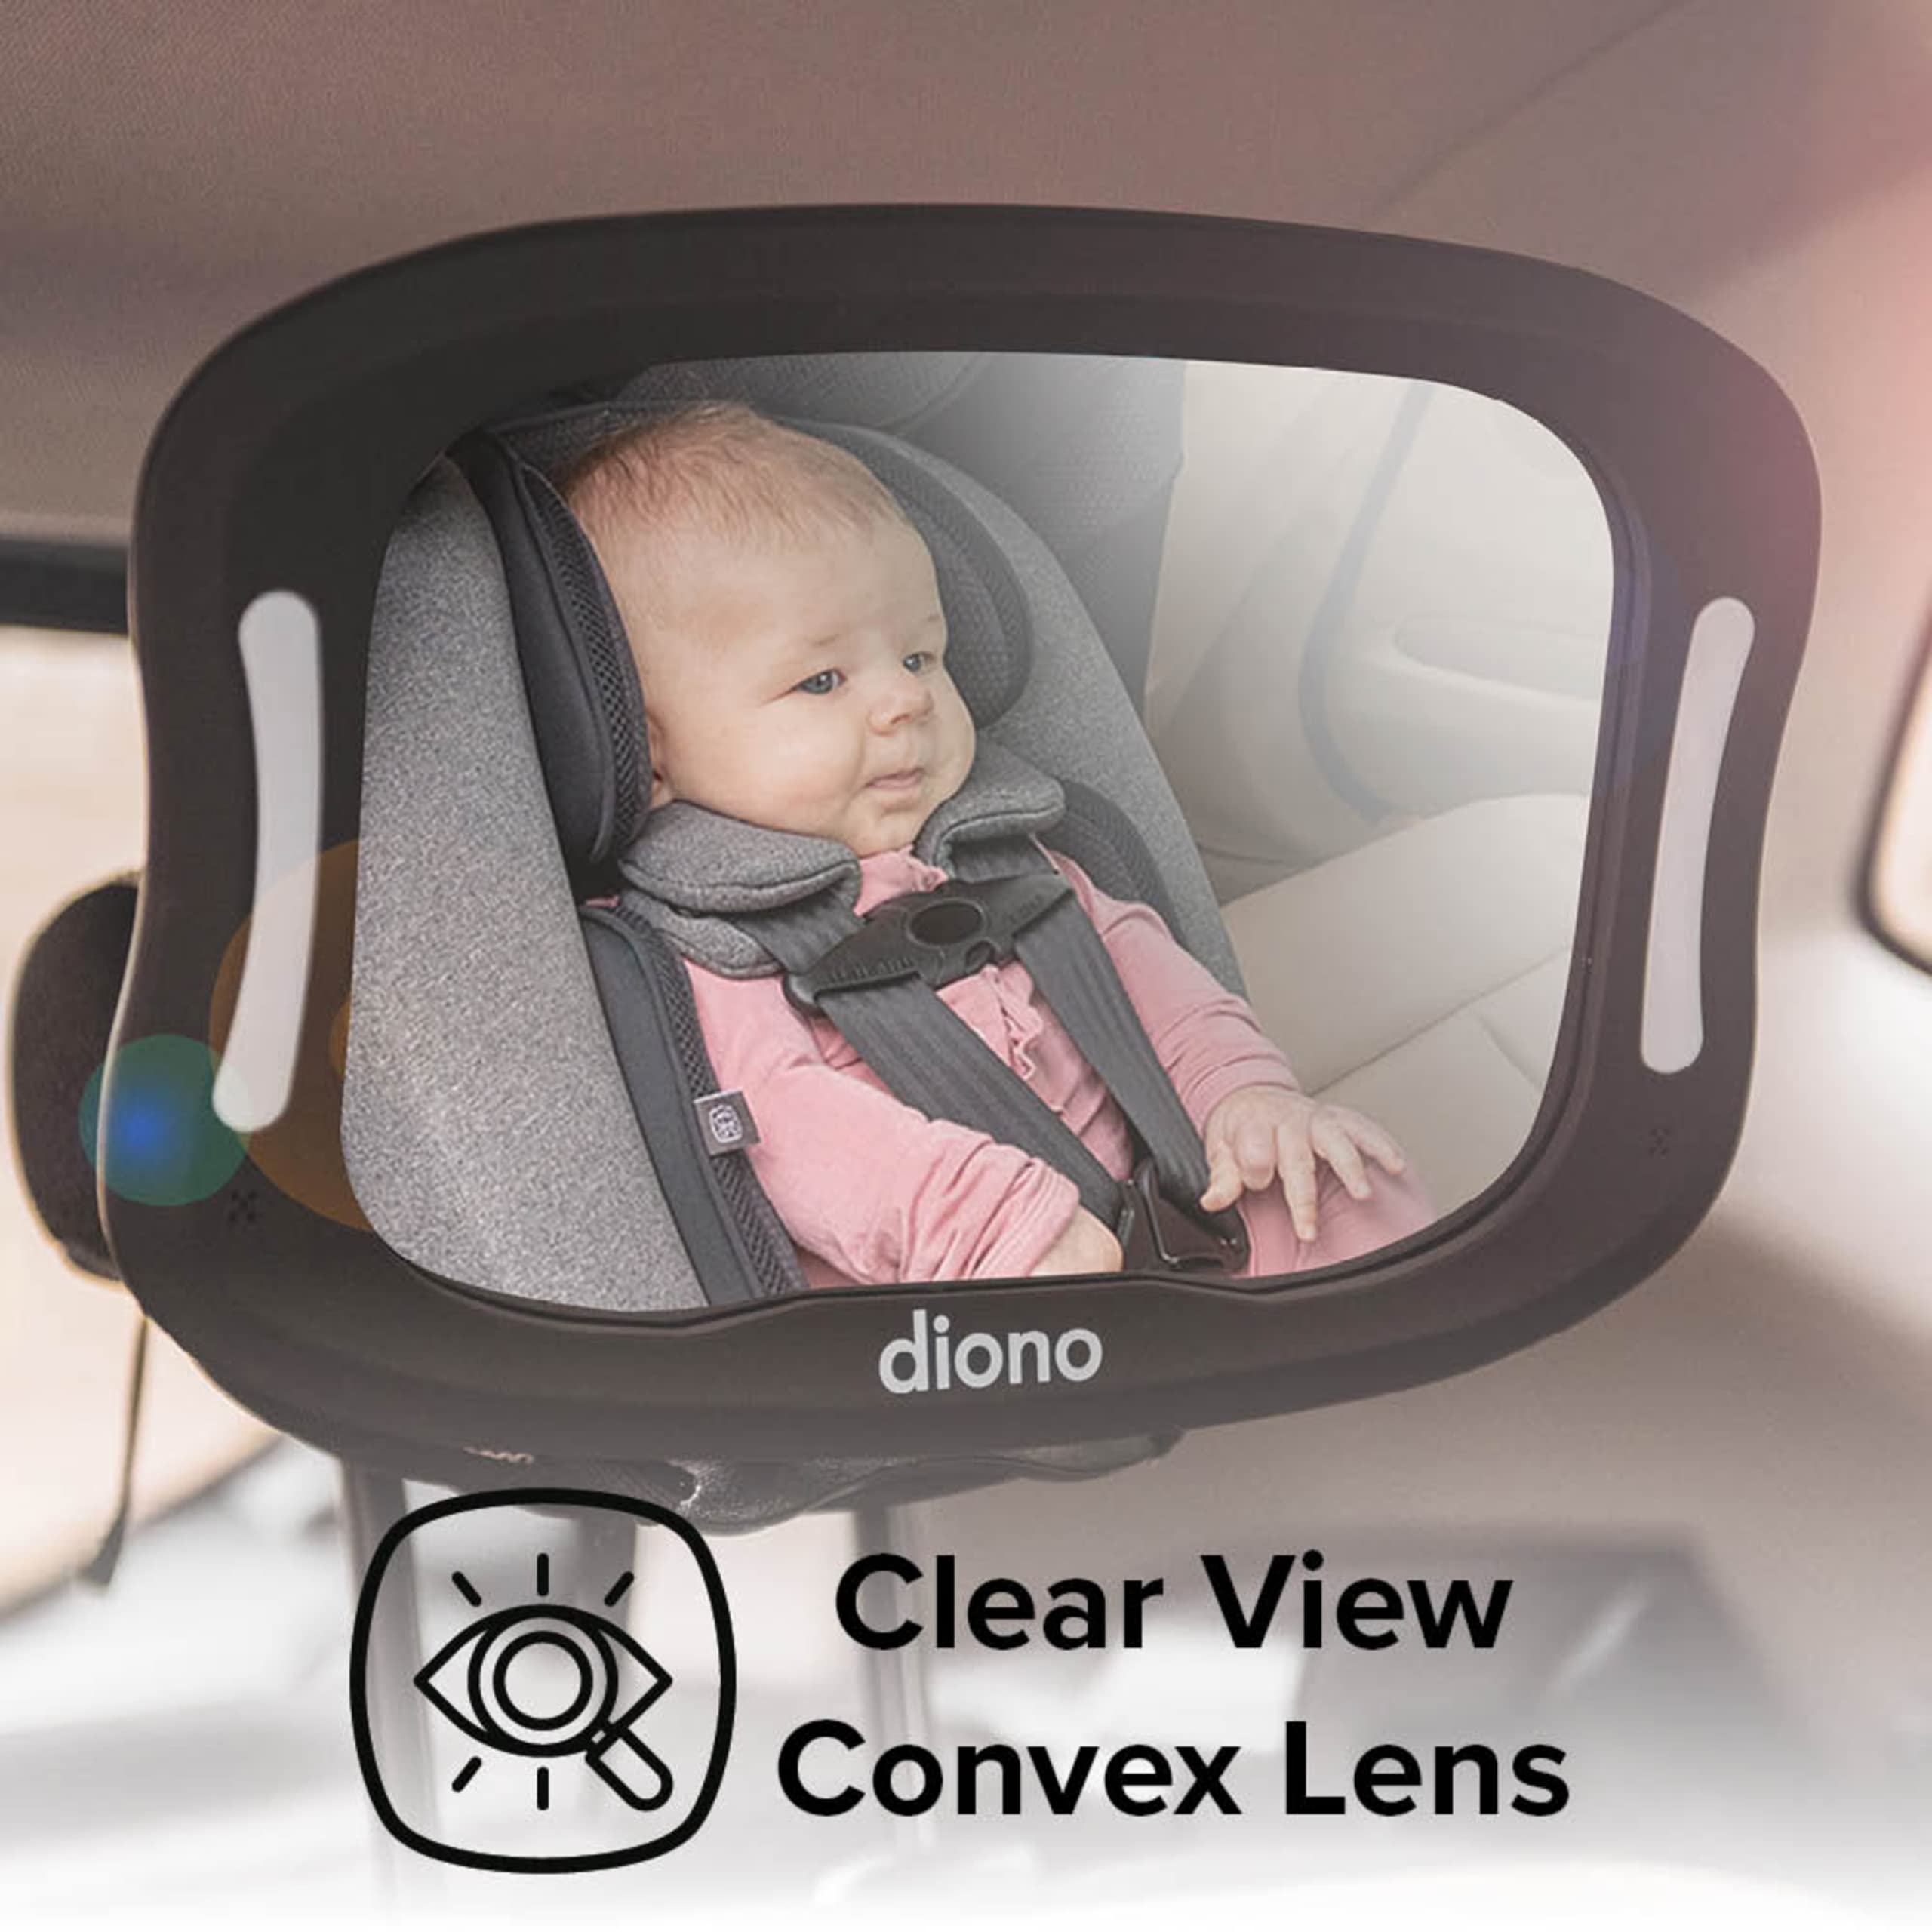 Diono Easy View XXL Baby Car Mirror with Extra Wide View, Safety Car Seat Mirror for Rear Facing Infant with 360 Rotation, LED Night Light, Wide Crystal Clear View, Shatterproof, Crash Tested